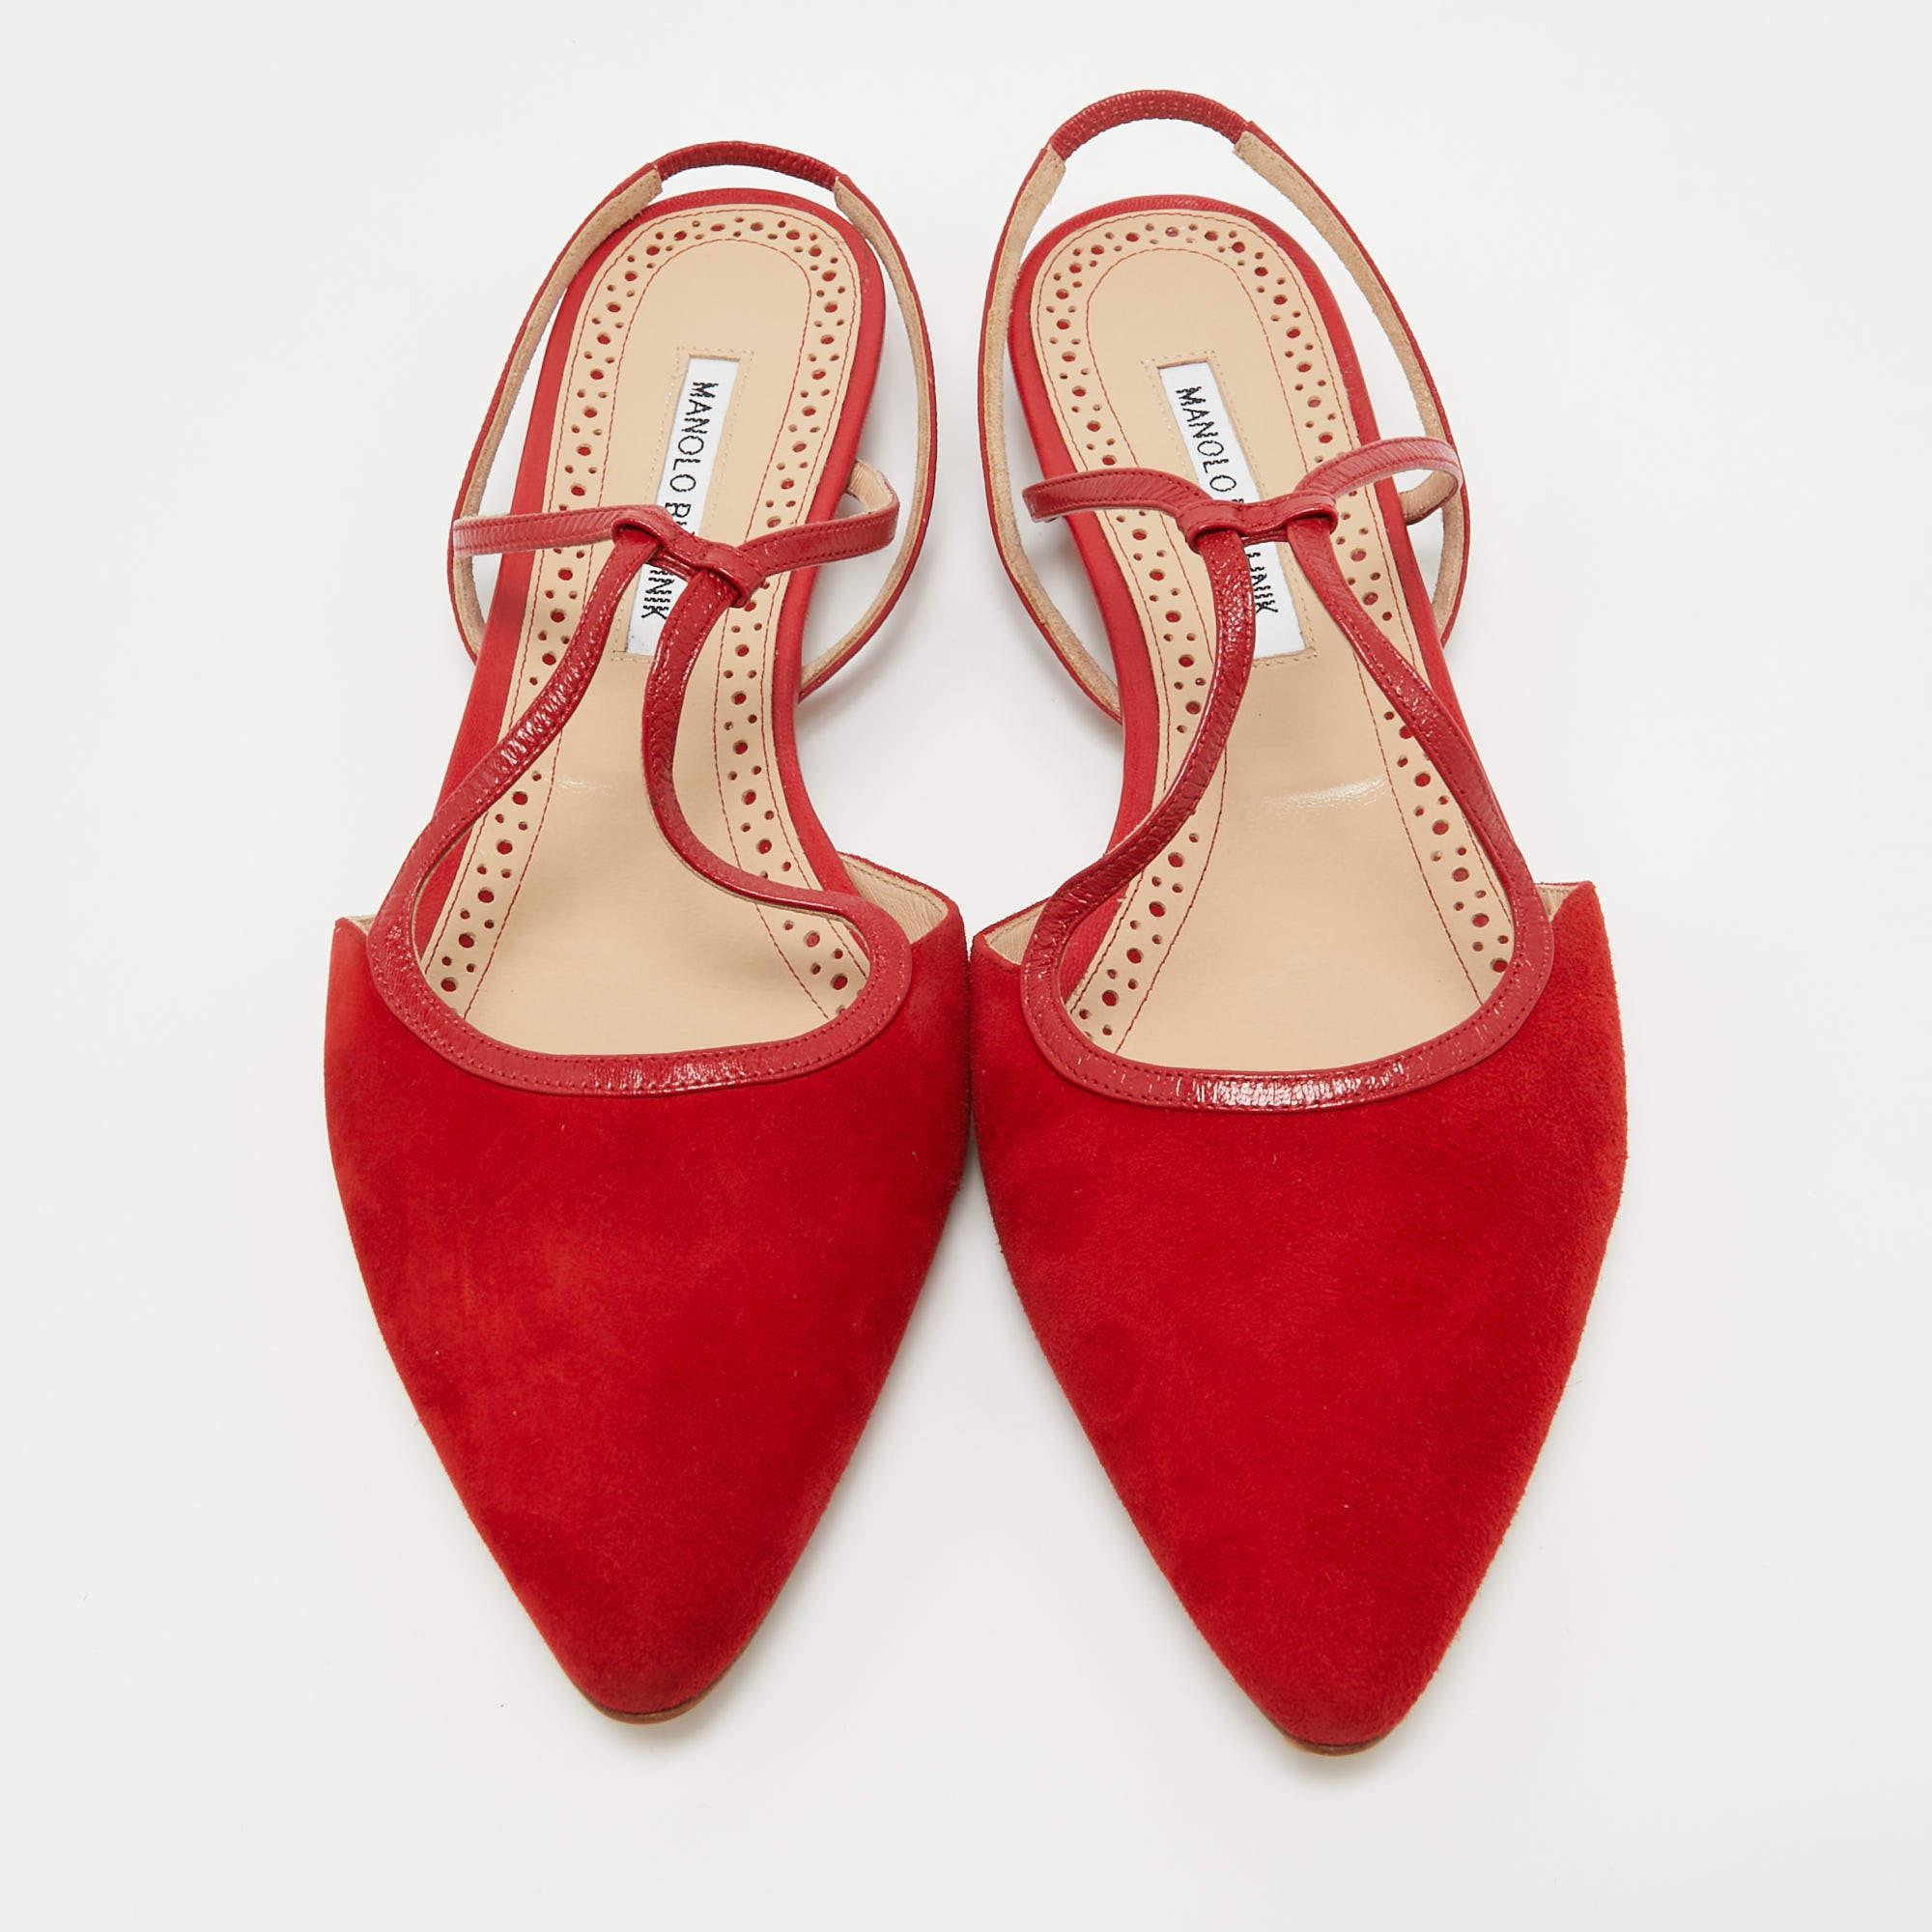 A perfect blend of luxury, style, and comfort. These designer flats are made using prime quality materials and frame your feet in the most elegant way. They can be paired with a host of outfits from your wardrobe.

